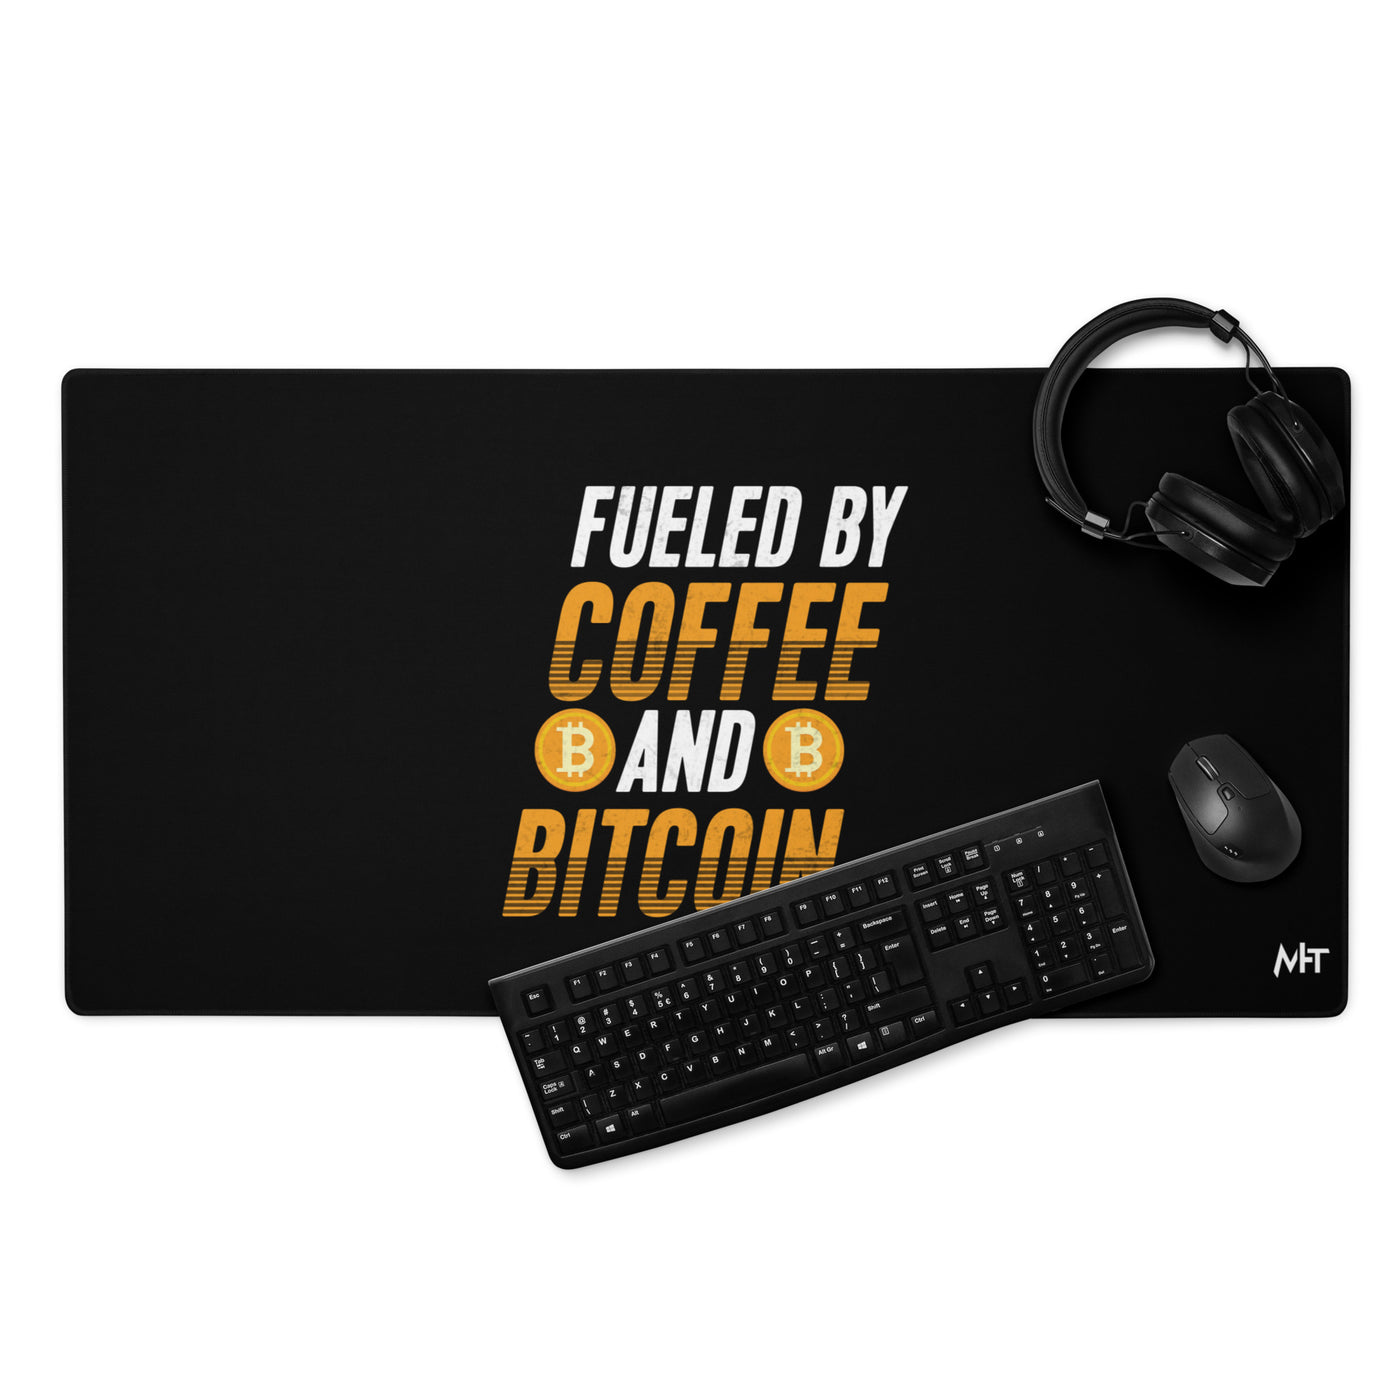 Fueled by Coffee and Bitcoin - Desk Mat